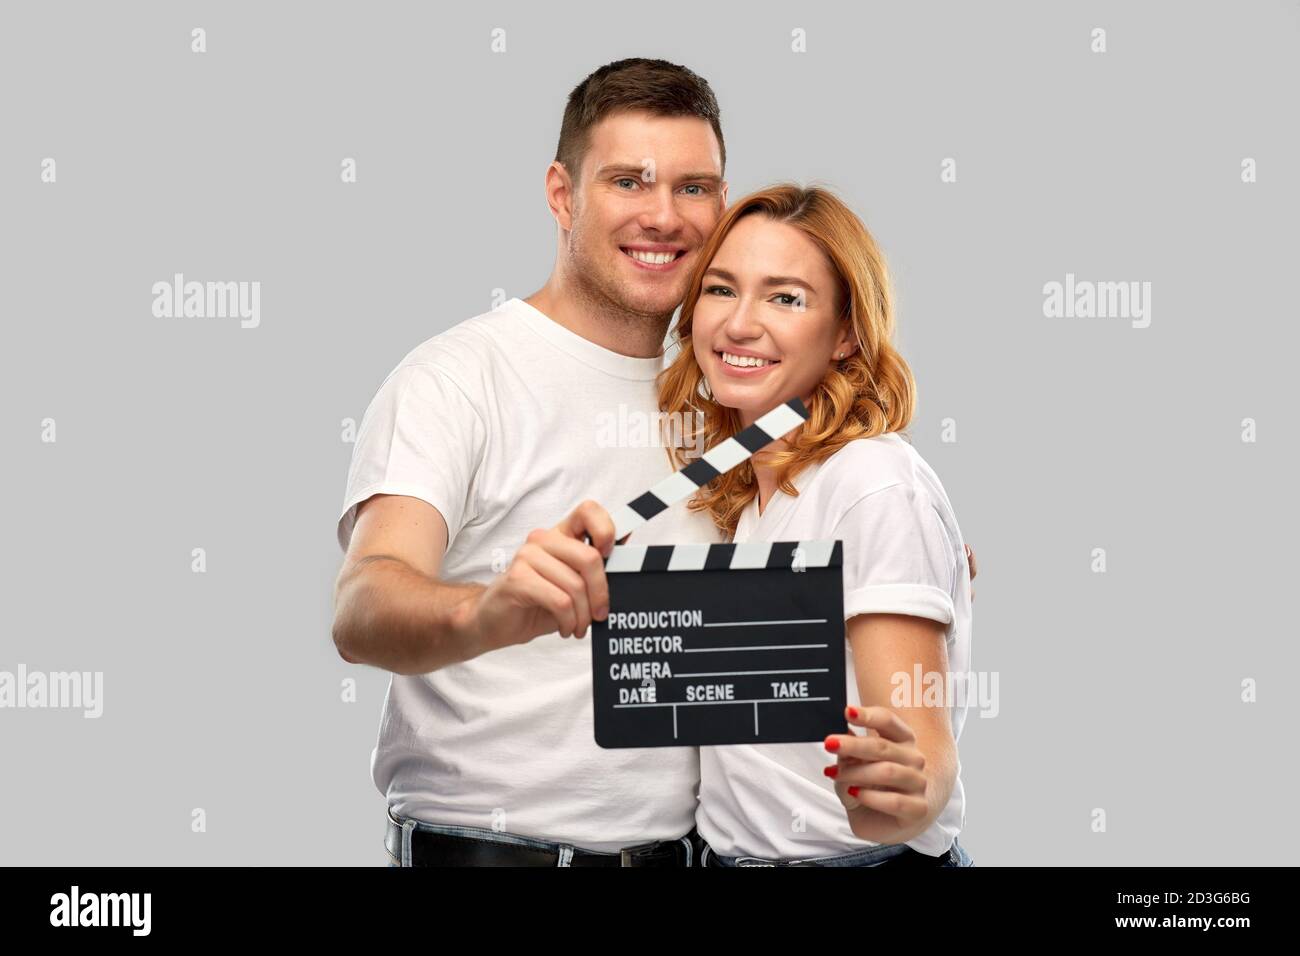 happy couple in white t-shirts with clapperboard Stock Photo